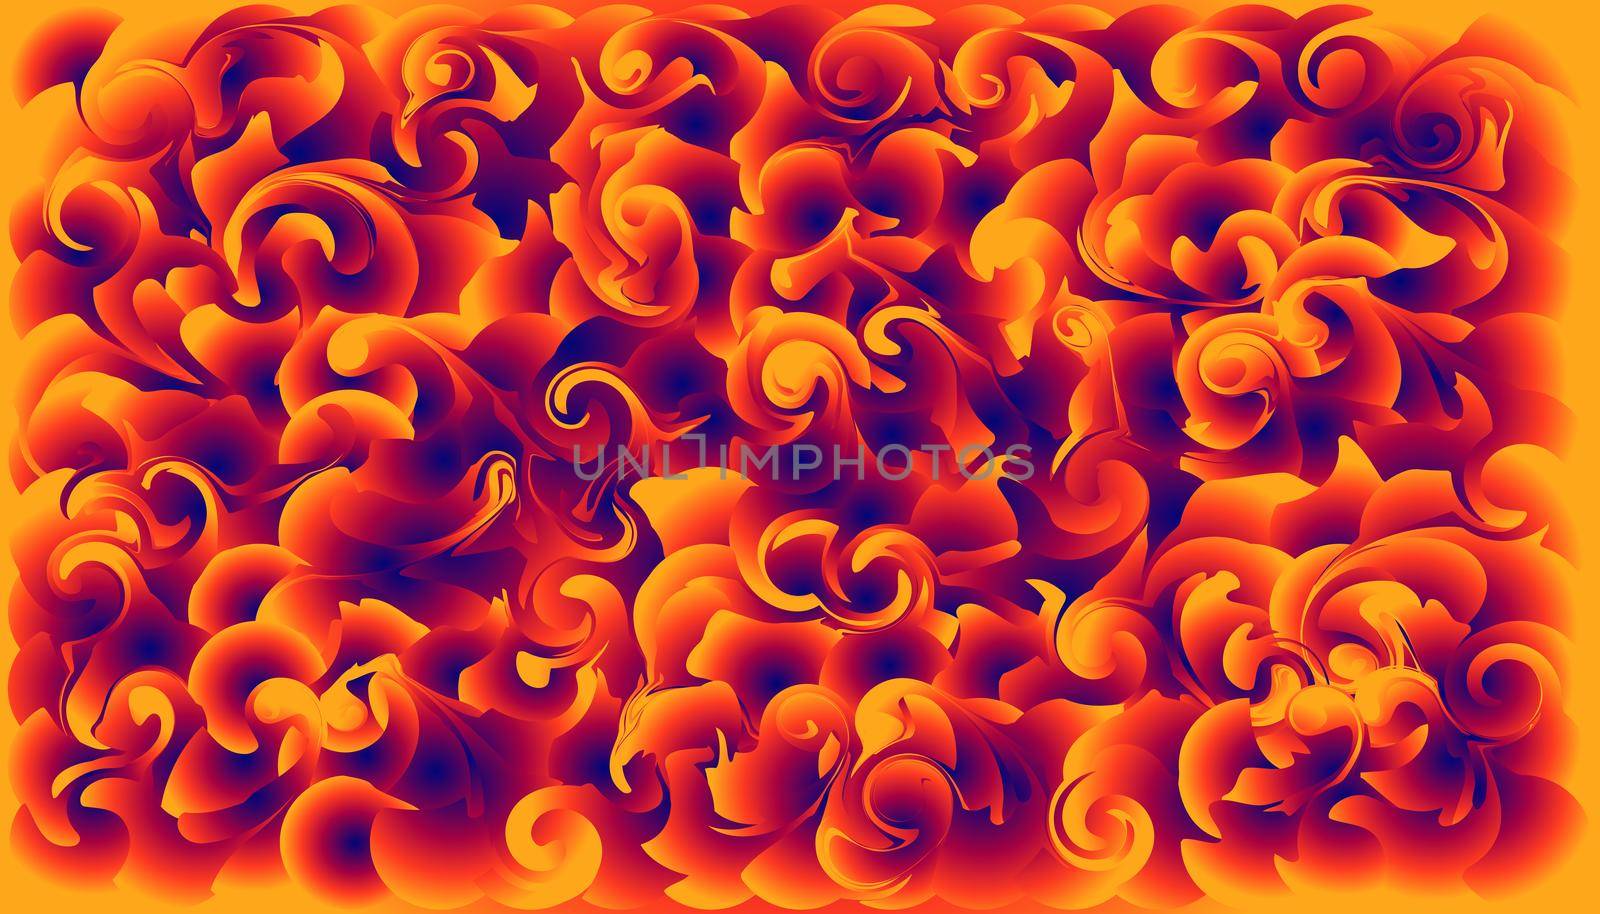 abstract twirl blend like carving flower element. colorful beautiful background design. vector illustration eps10